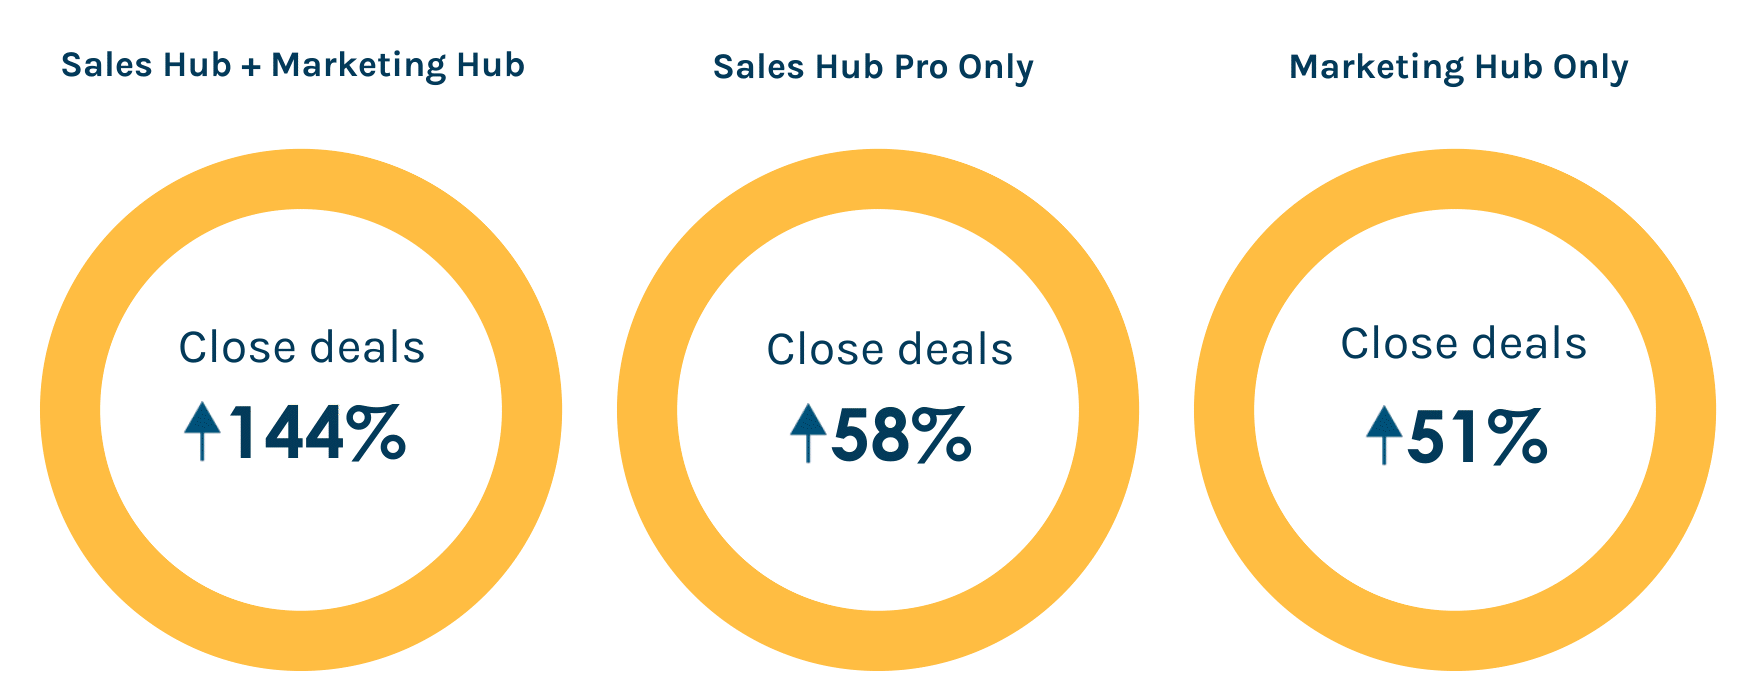 Results when Sales & Marketing Hubs are combined